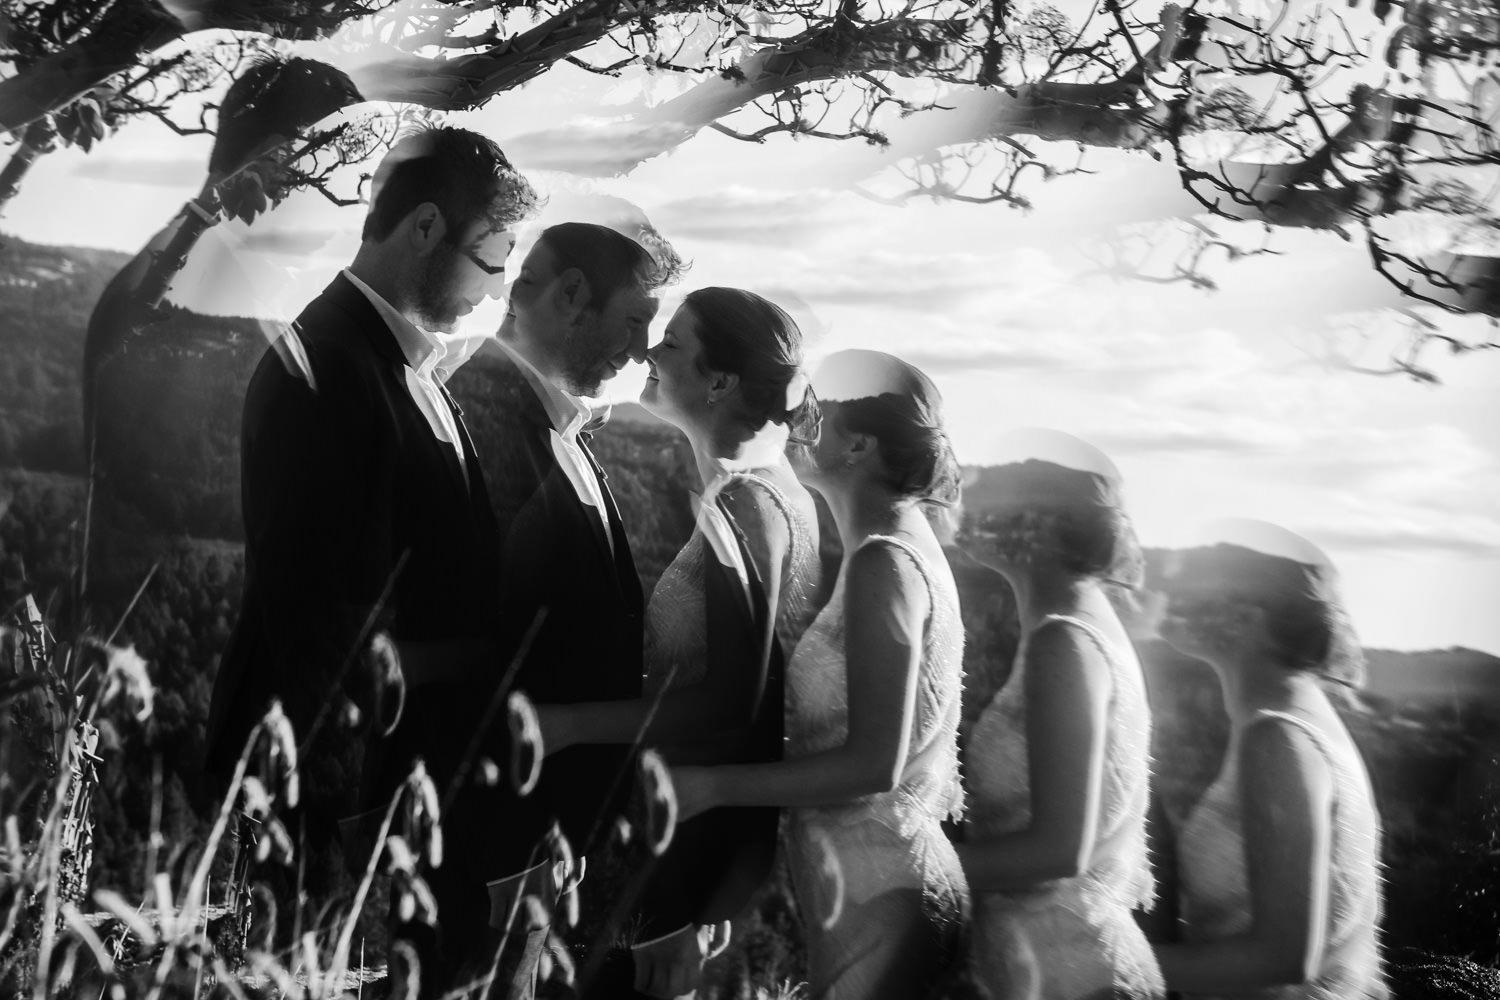 Creative and artistic wedding photography by Victoria BC photographer Christina Craft